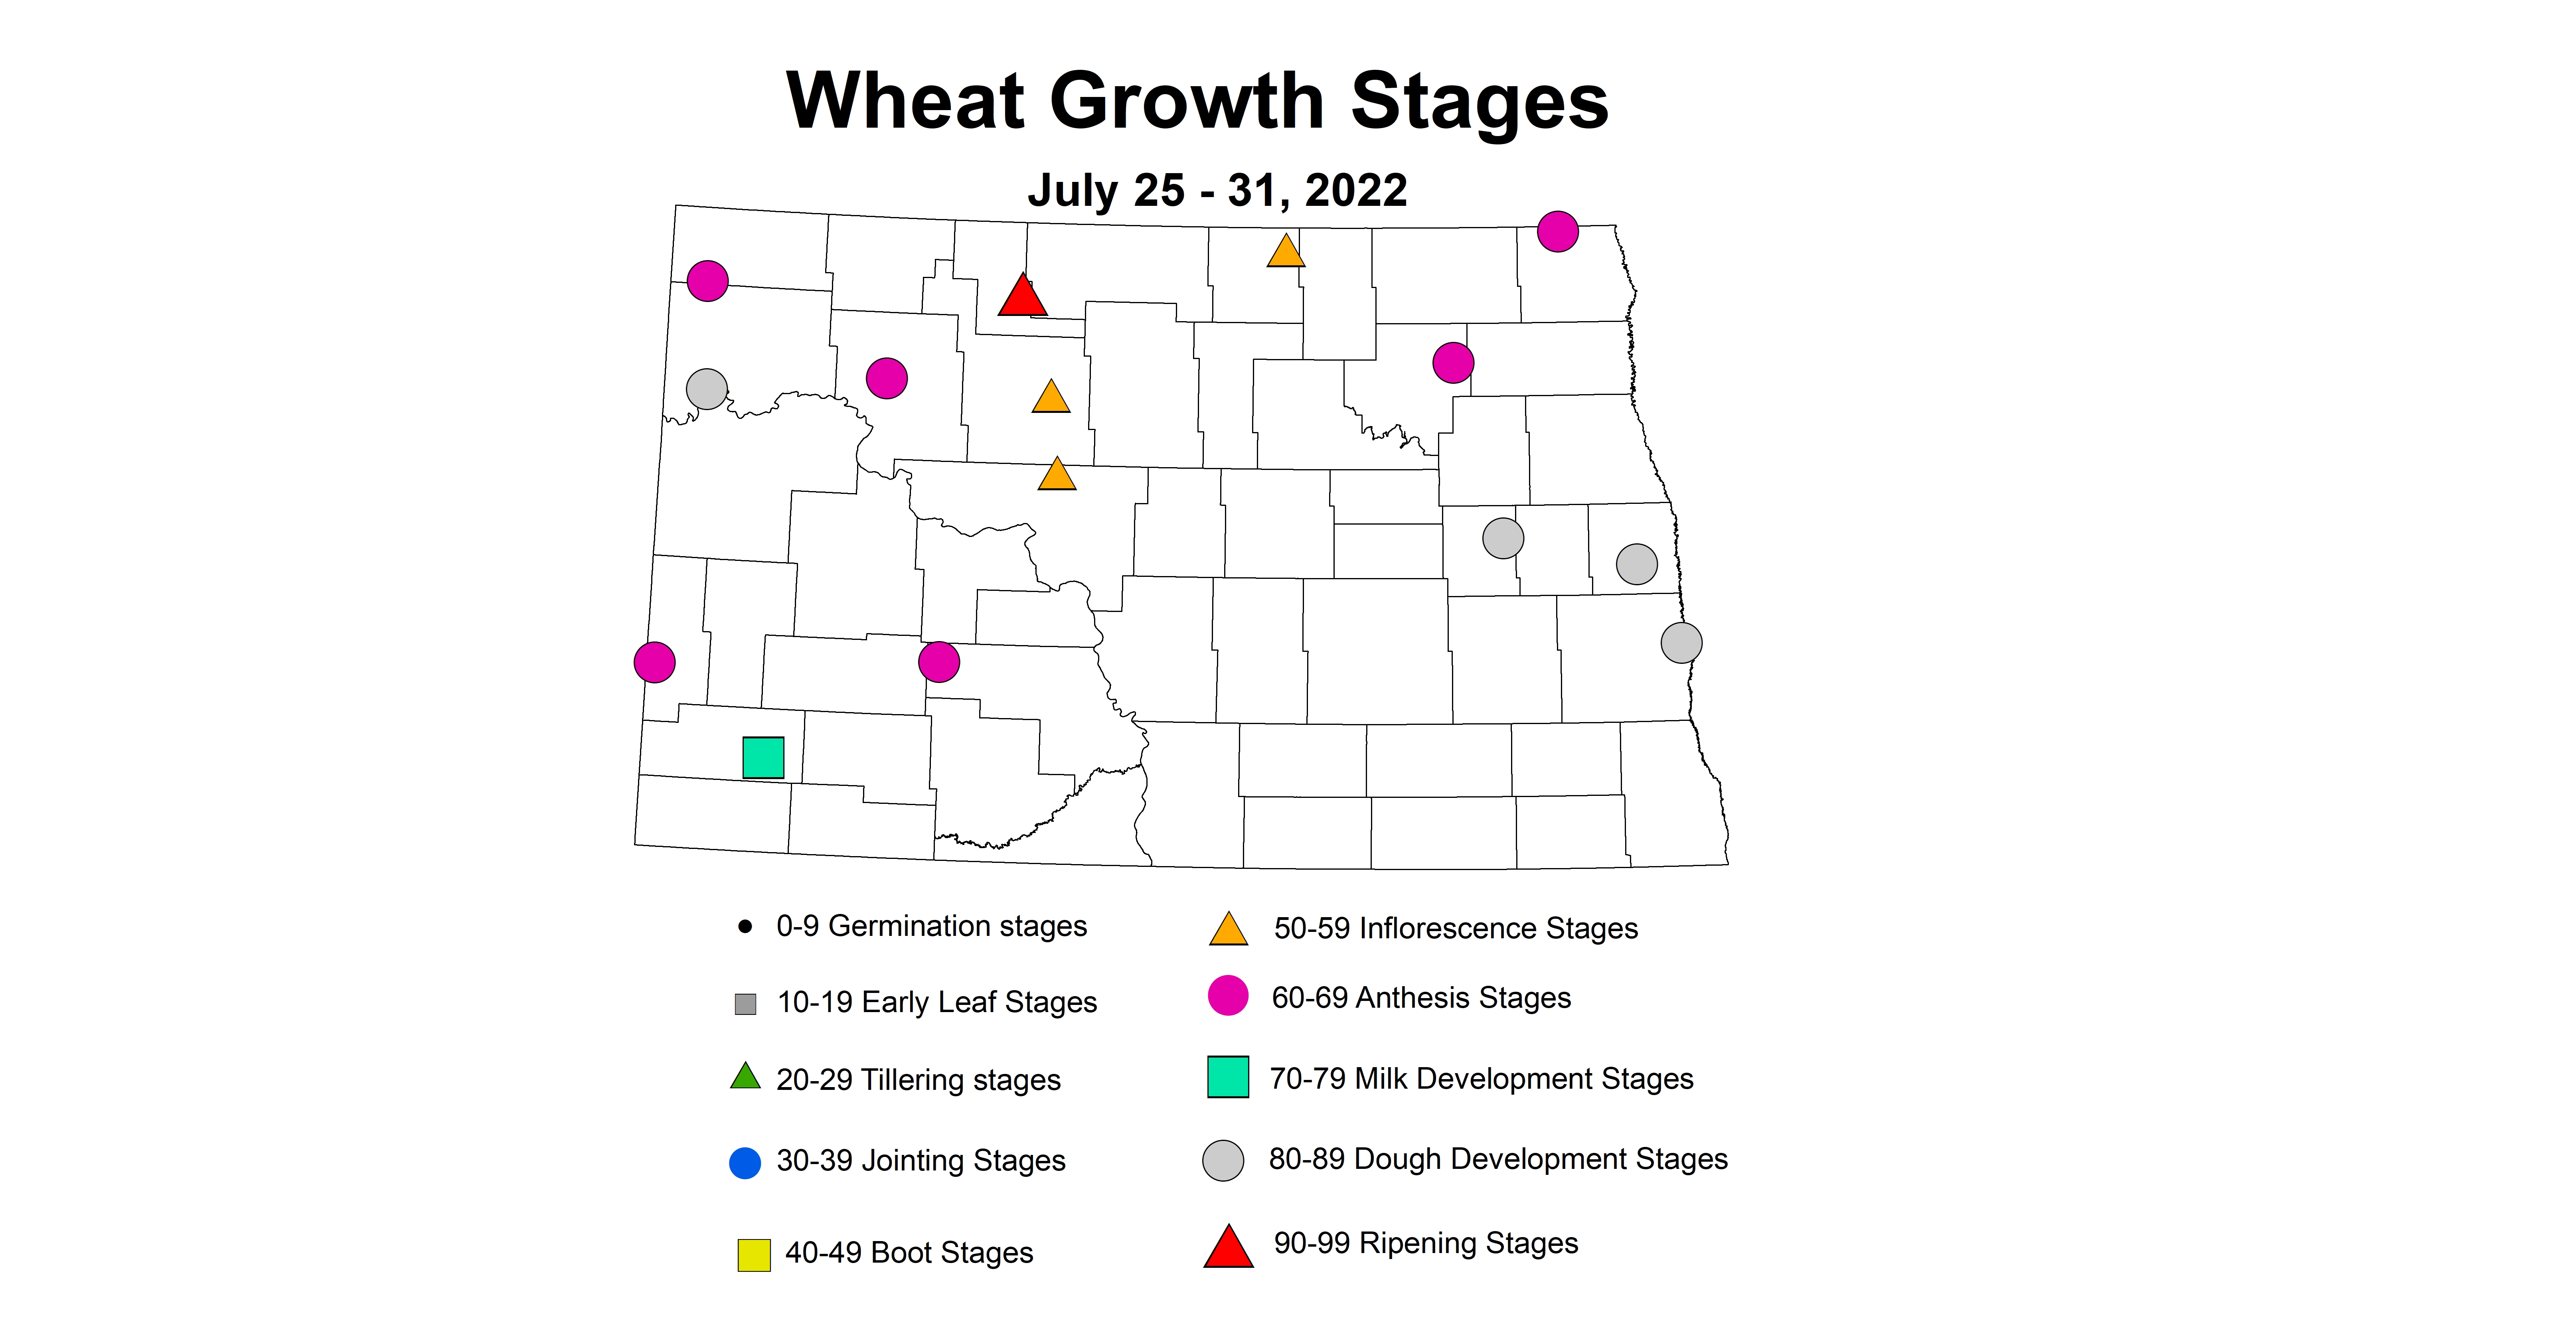 wheat insecttrap growth stages 2022 7.25-7.31.jpg